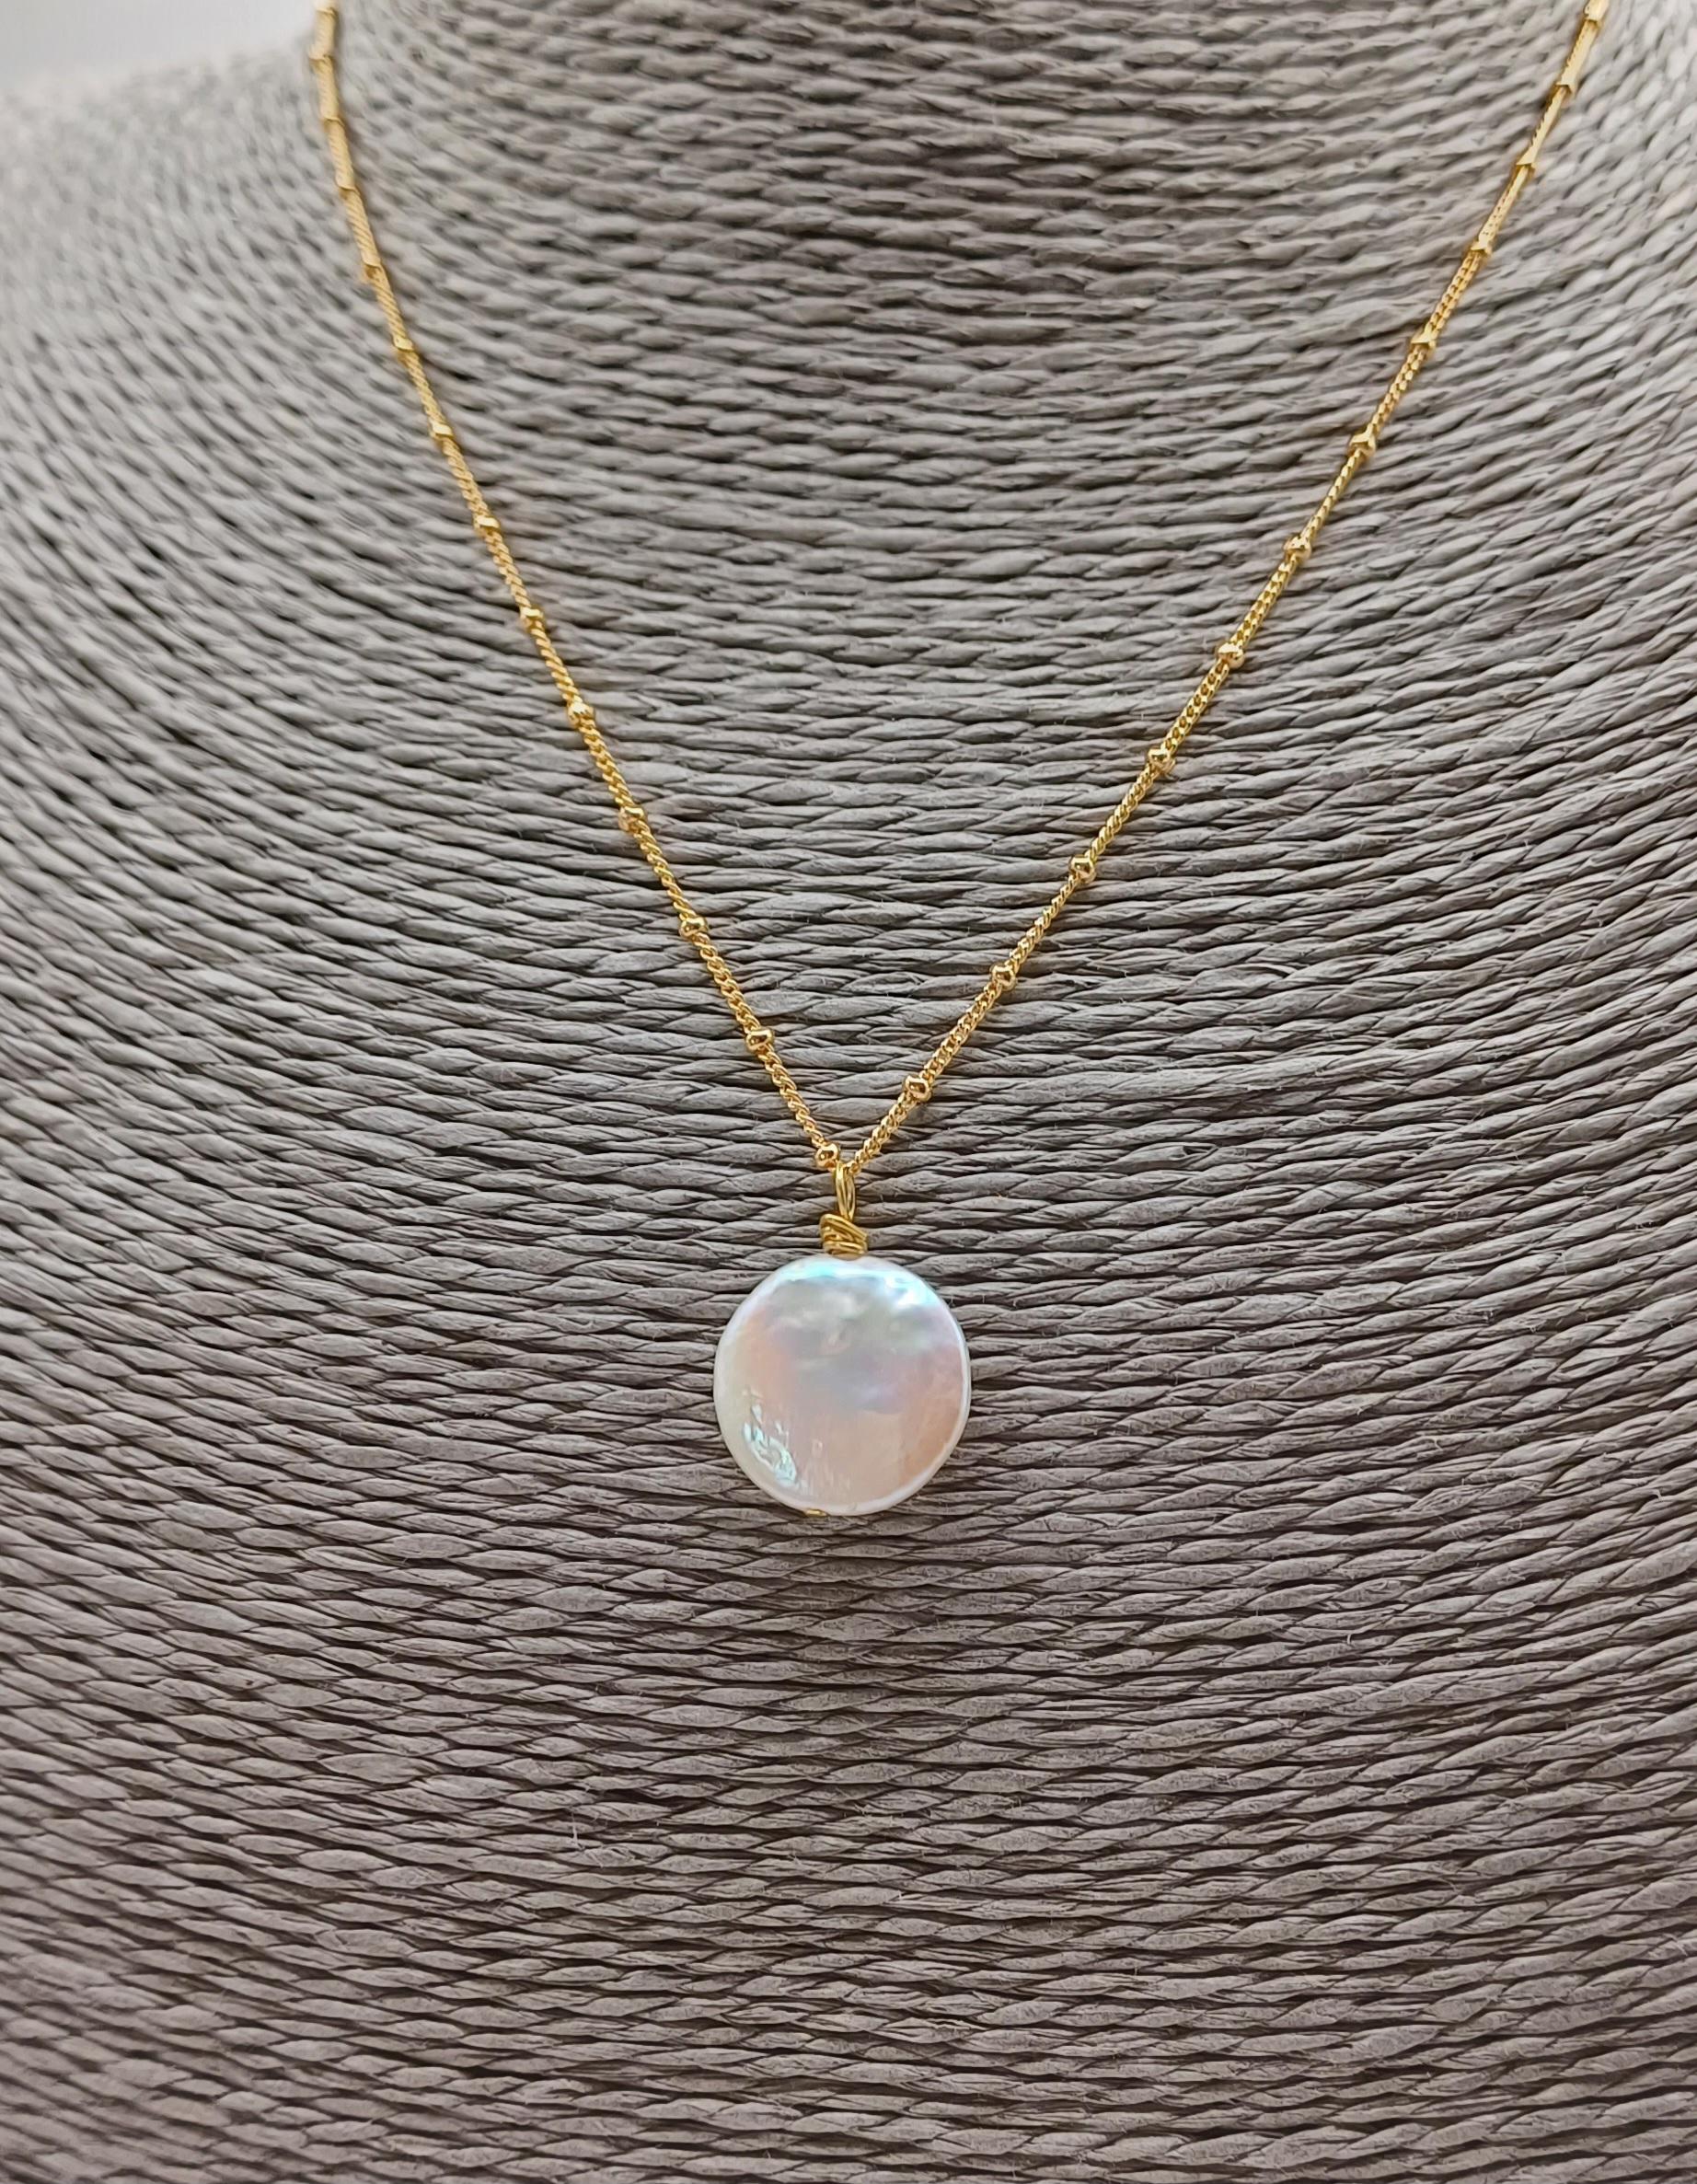 NECKLACES - 14k Gold Filled Coin Pearl Necklace